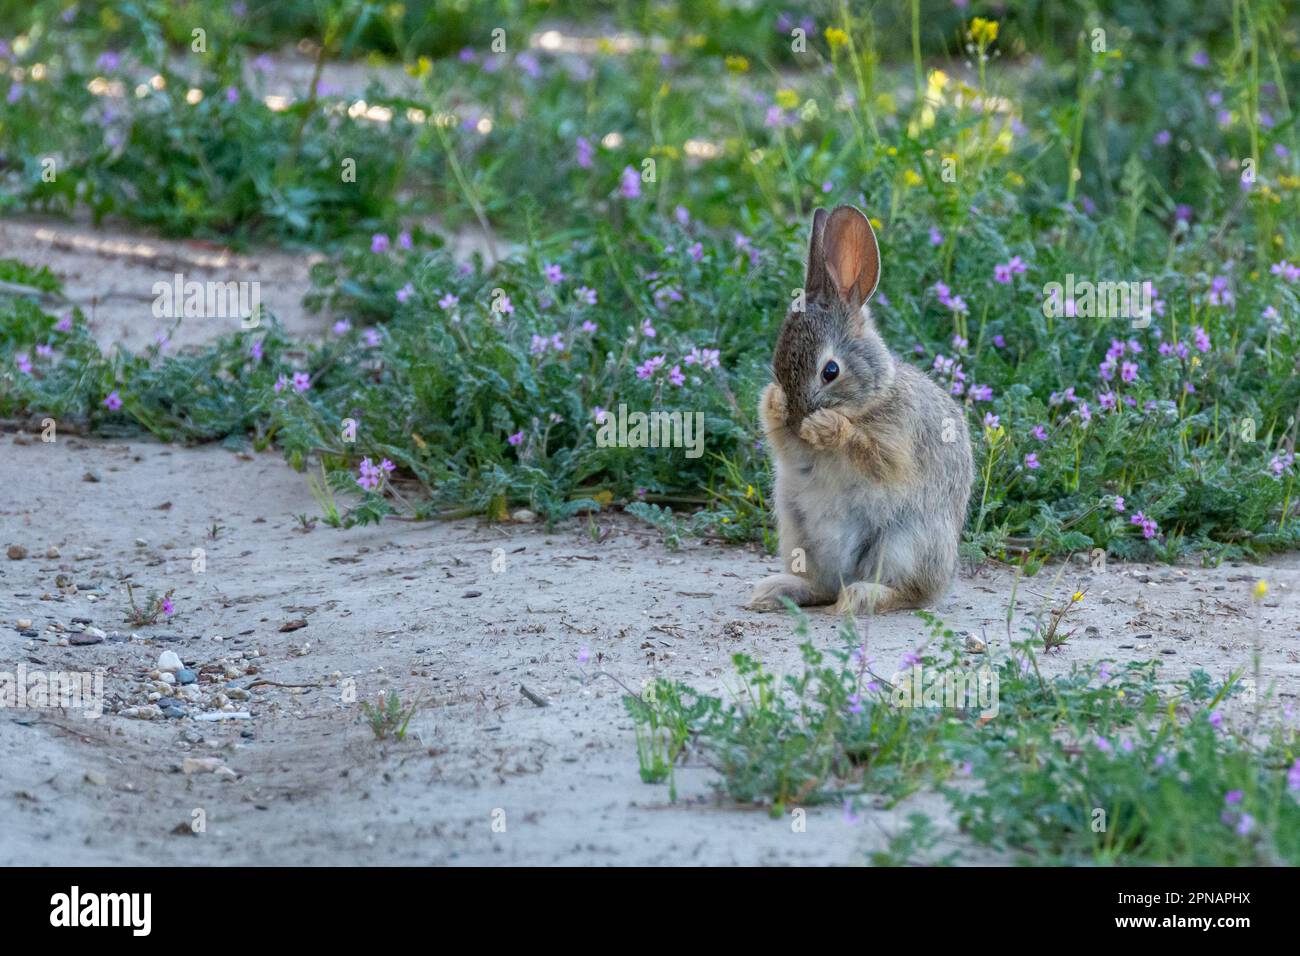 A young desert cottontail (Sylvilagus audubonii) cleans its paws and face amidst wildflowers in the Mojave desert of Southern California. Stock Photo